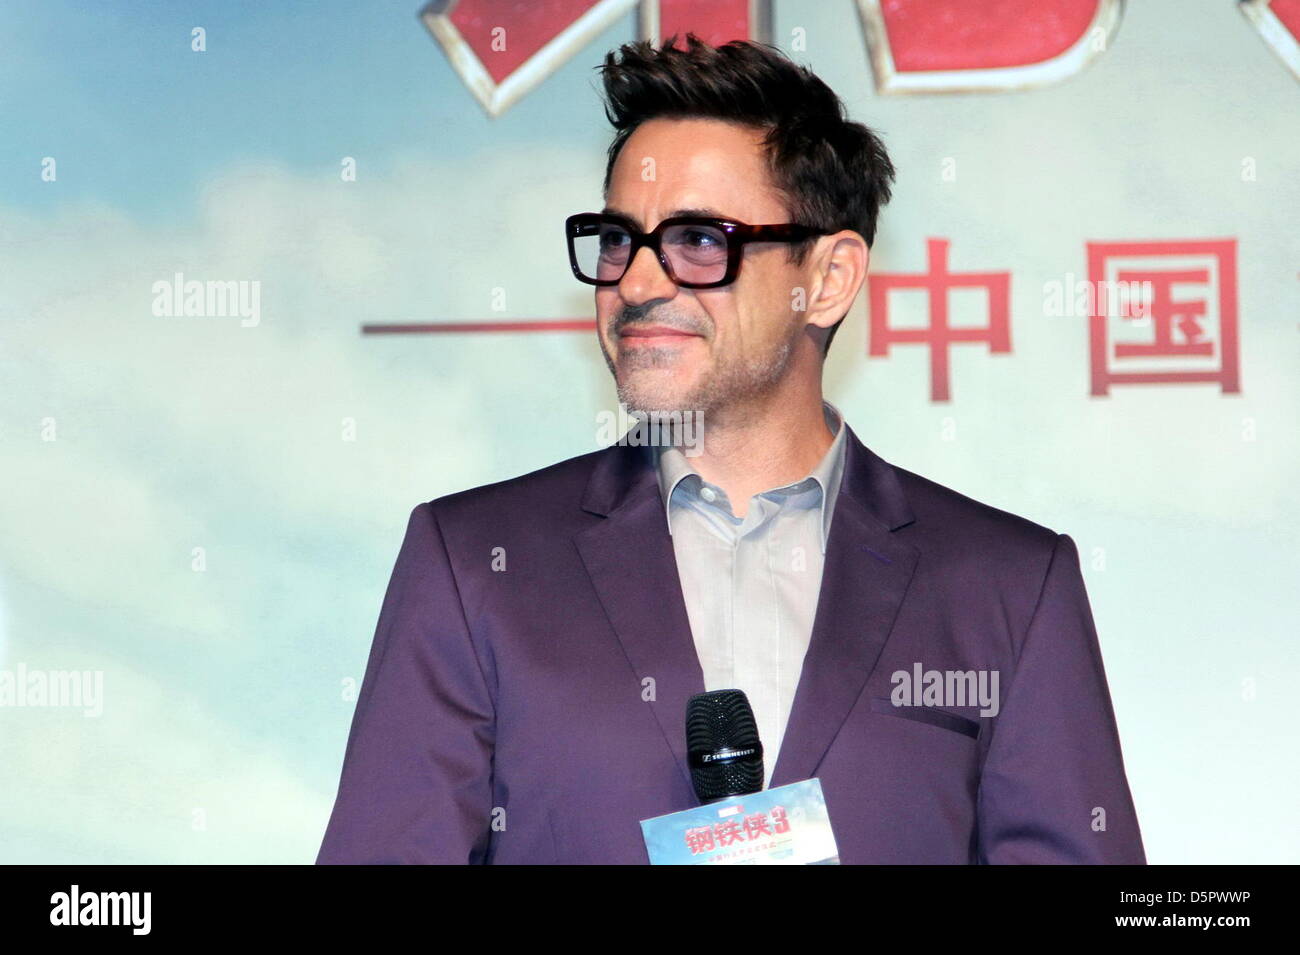 Beijing, China. 6th April, 2013. Robert Downey Jr. at premiere of movie Iron Man 3 in Beijing, China on Saturday April 06, 2013. Stock Photo